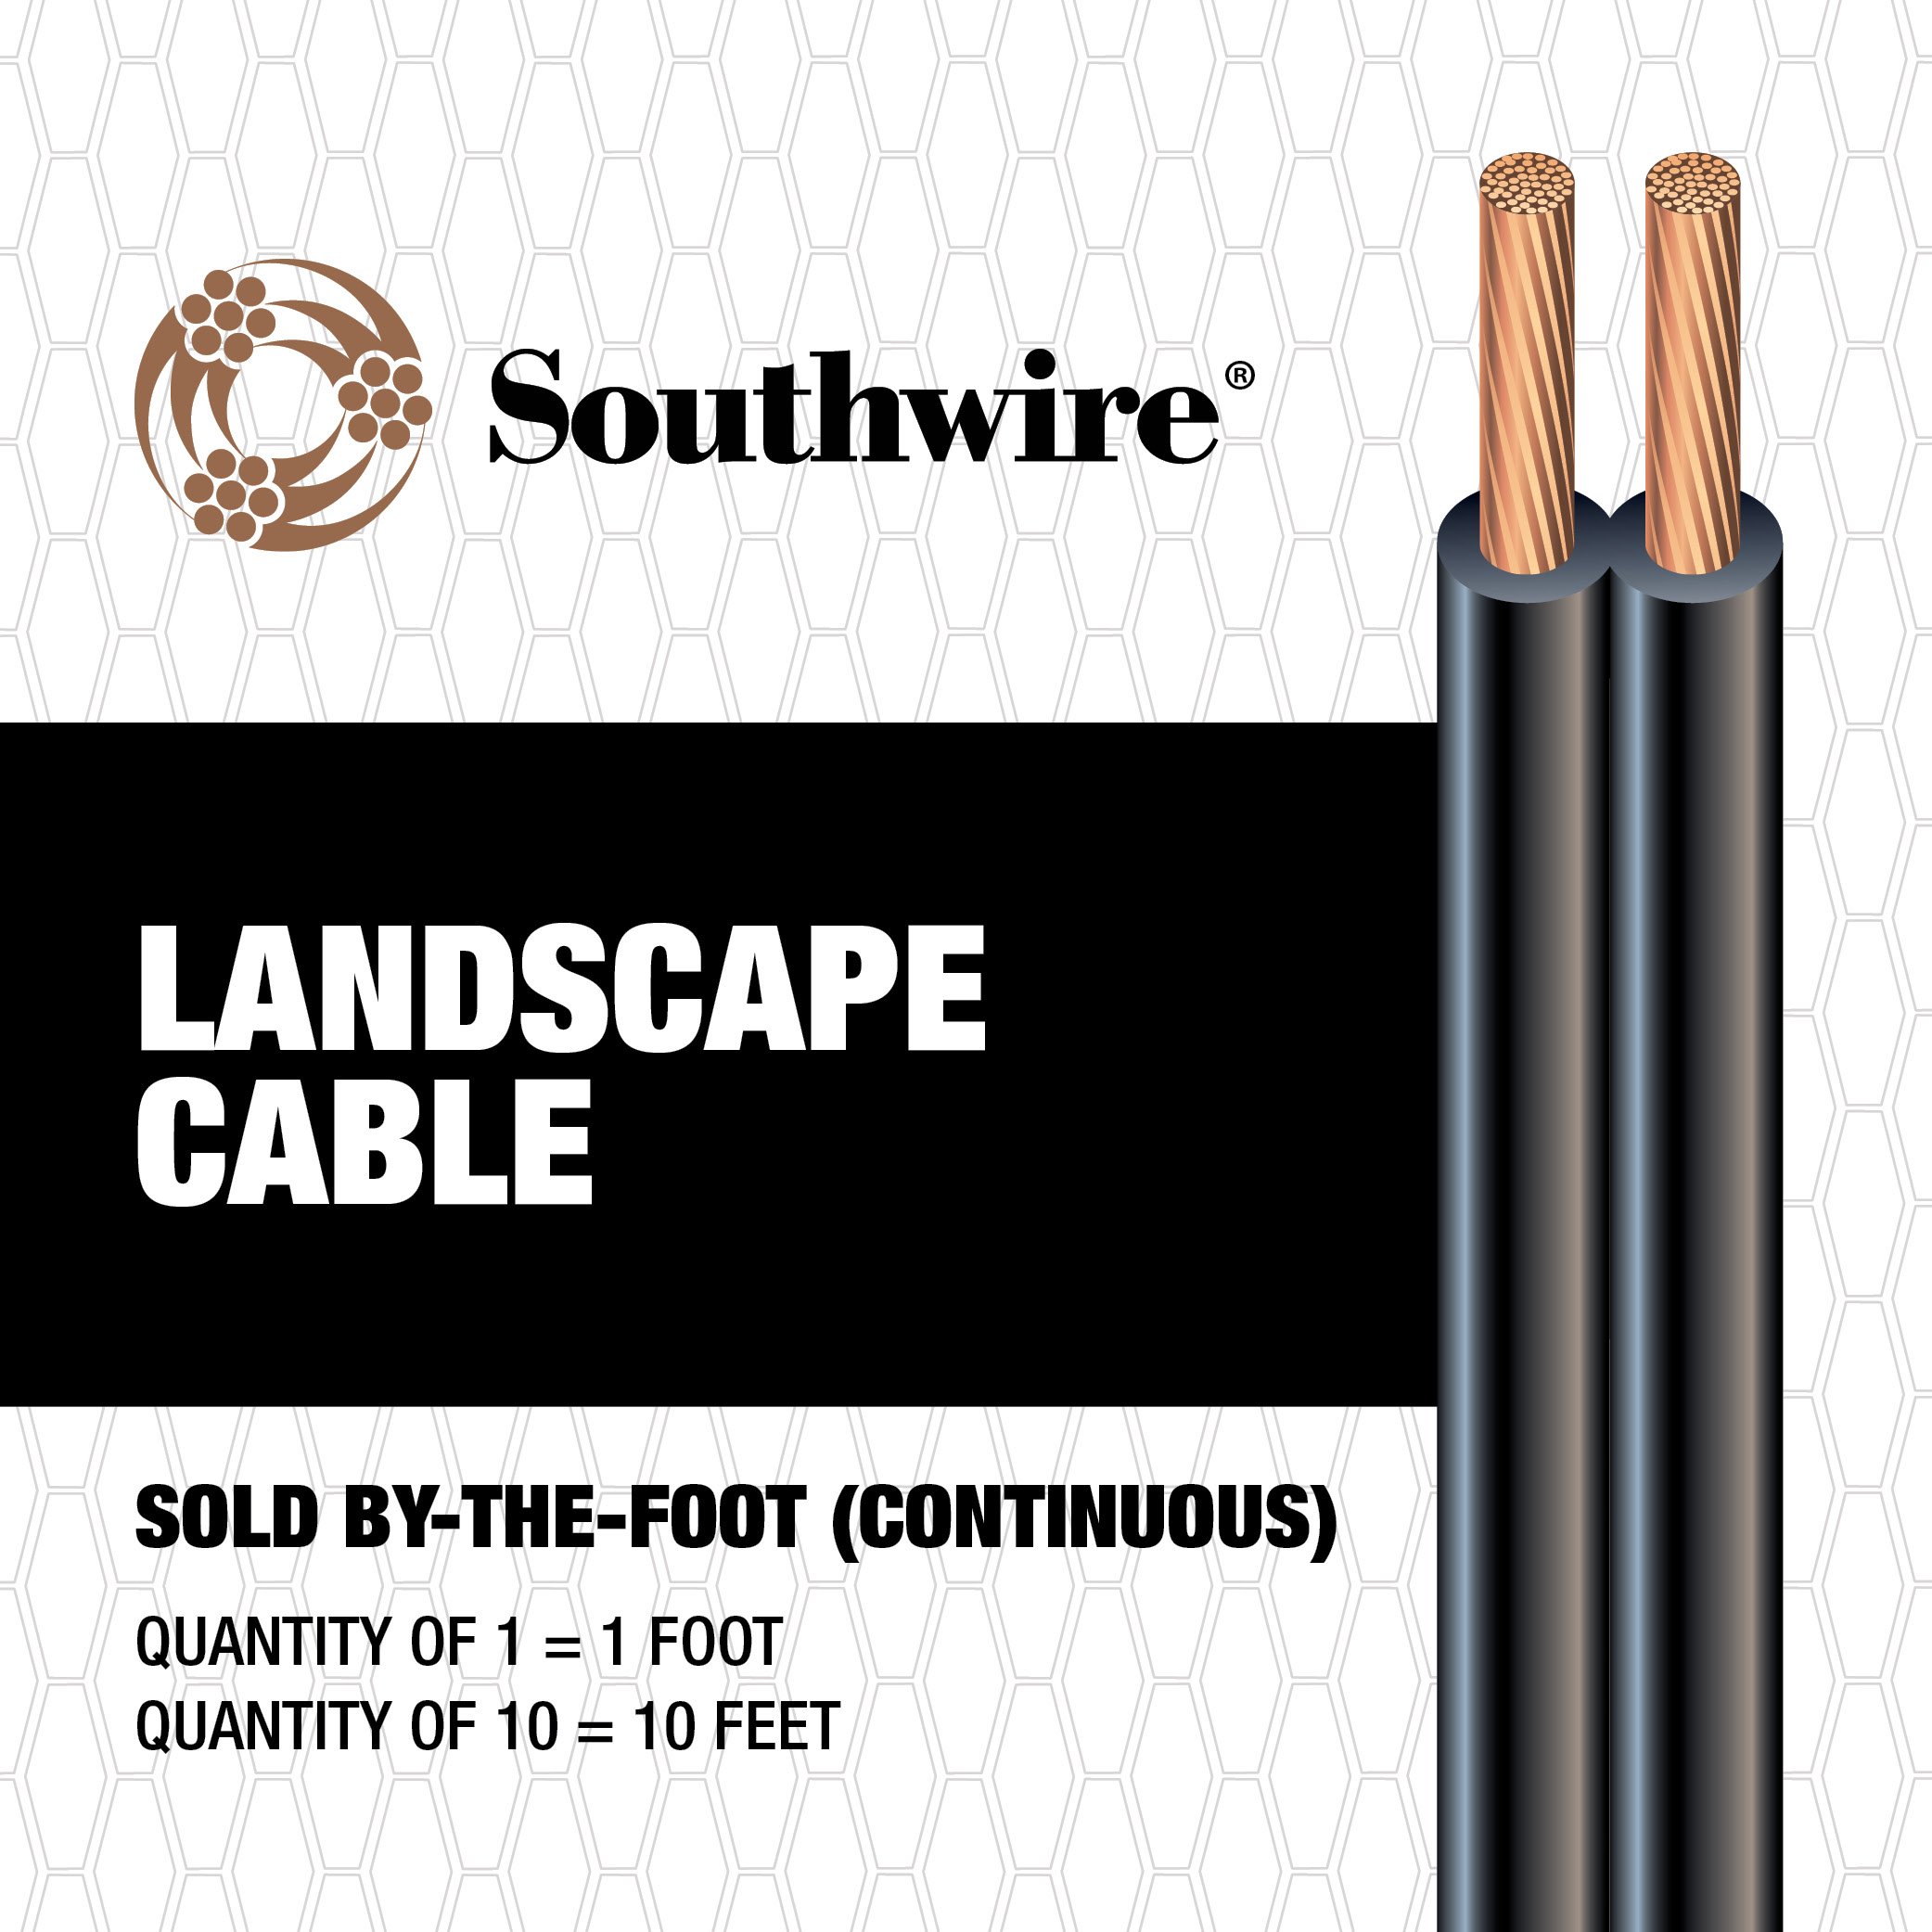 14/2 (14 AWG, 2 Conductor) 100 Feet Copper Landscape Wire - #70W13